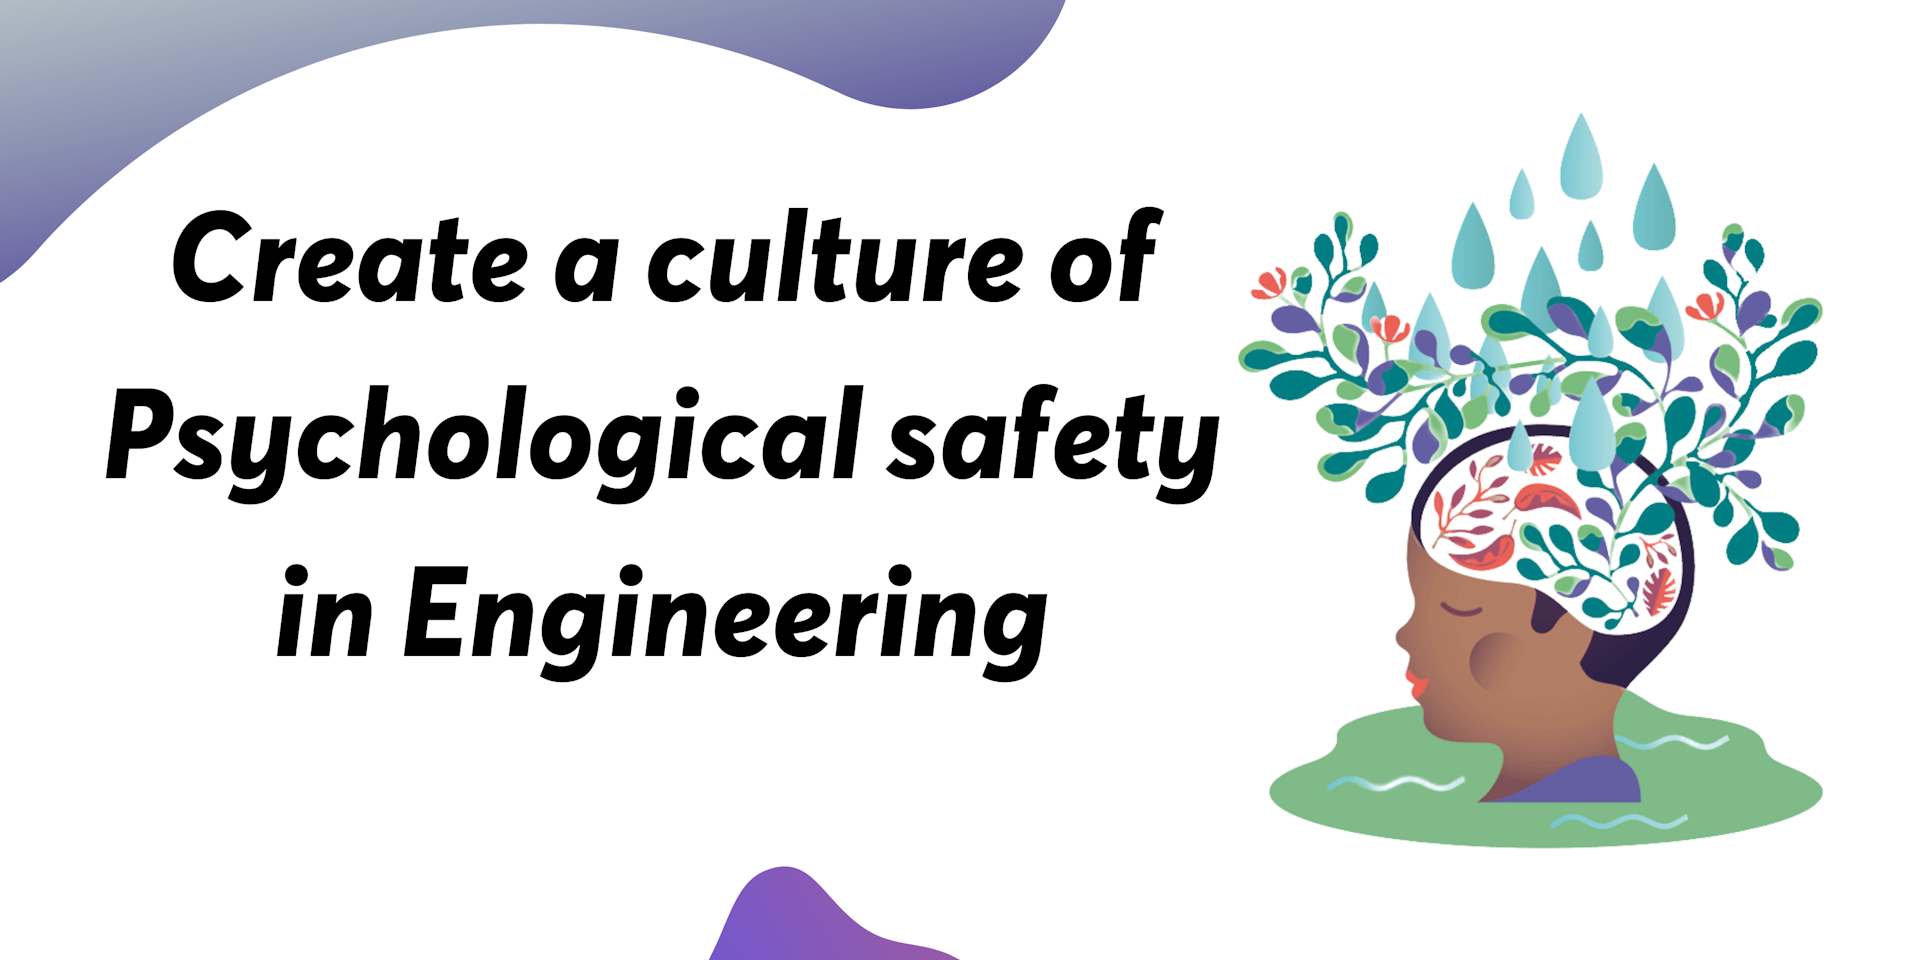 How Engineering leaders can create a culture of Psychological safety